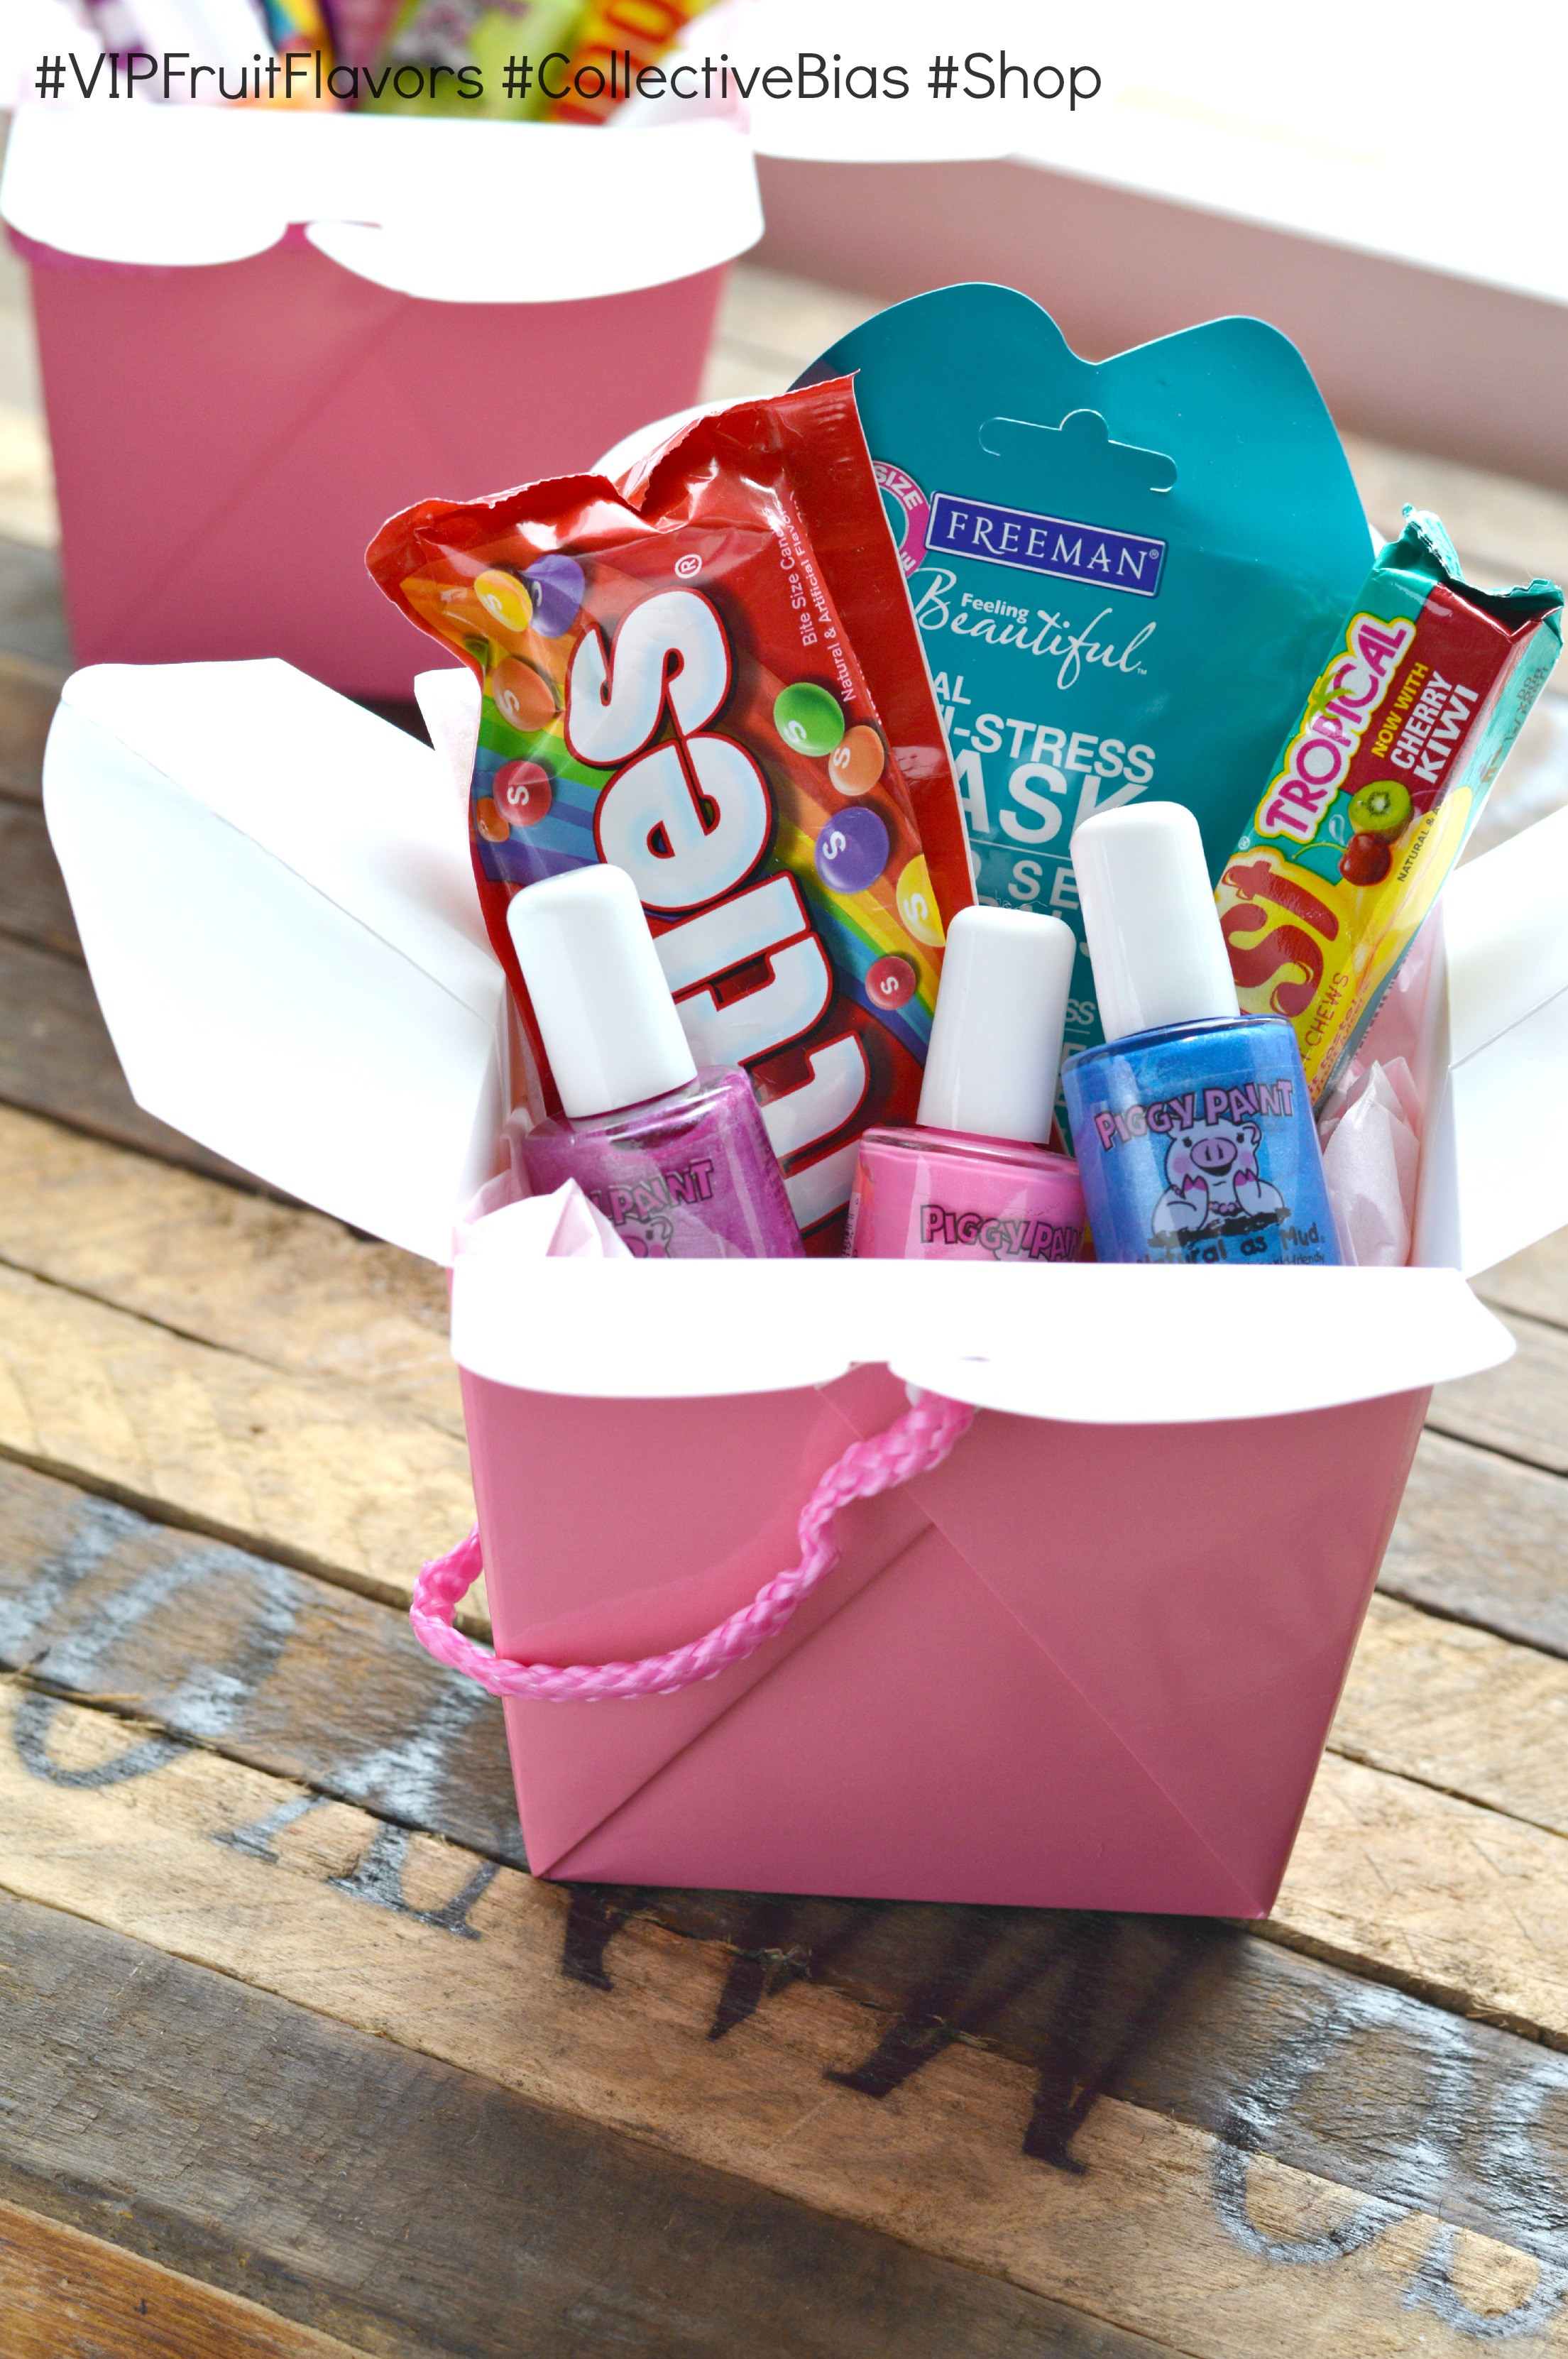 Diy Gift Ideas For Girls
 Skittles & Starburst Make For Awesome DIY Gifts It s